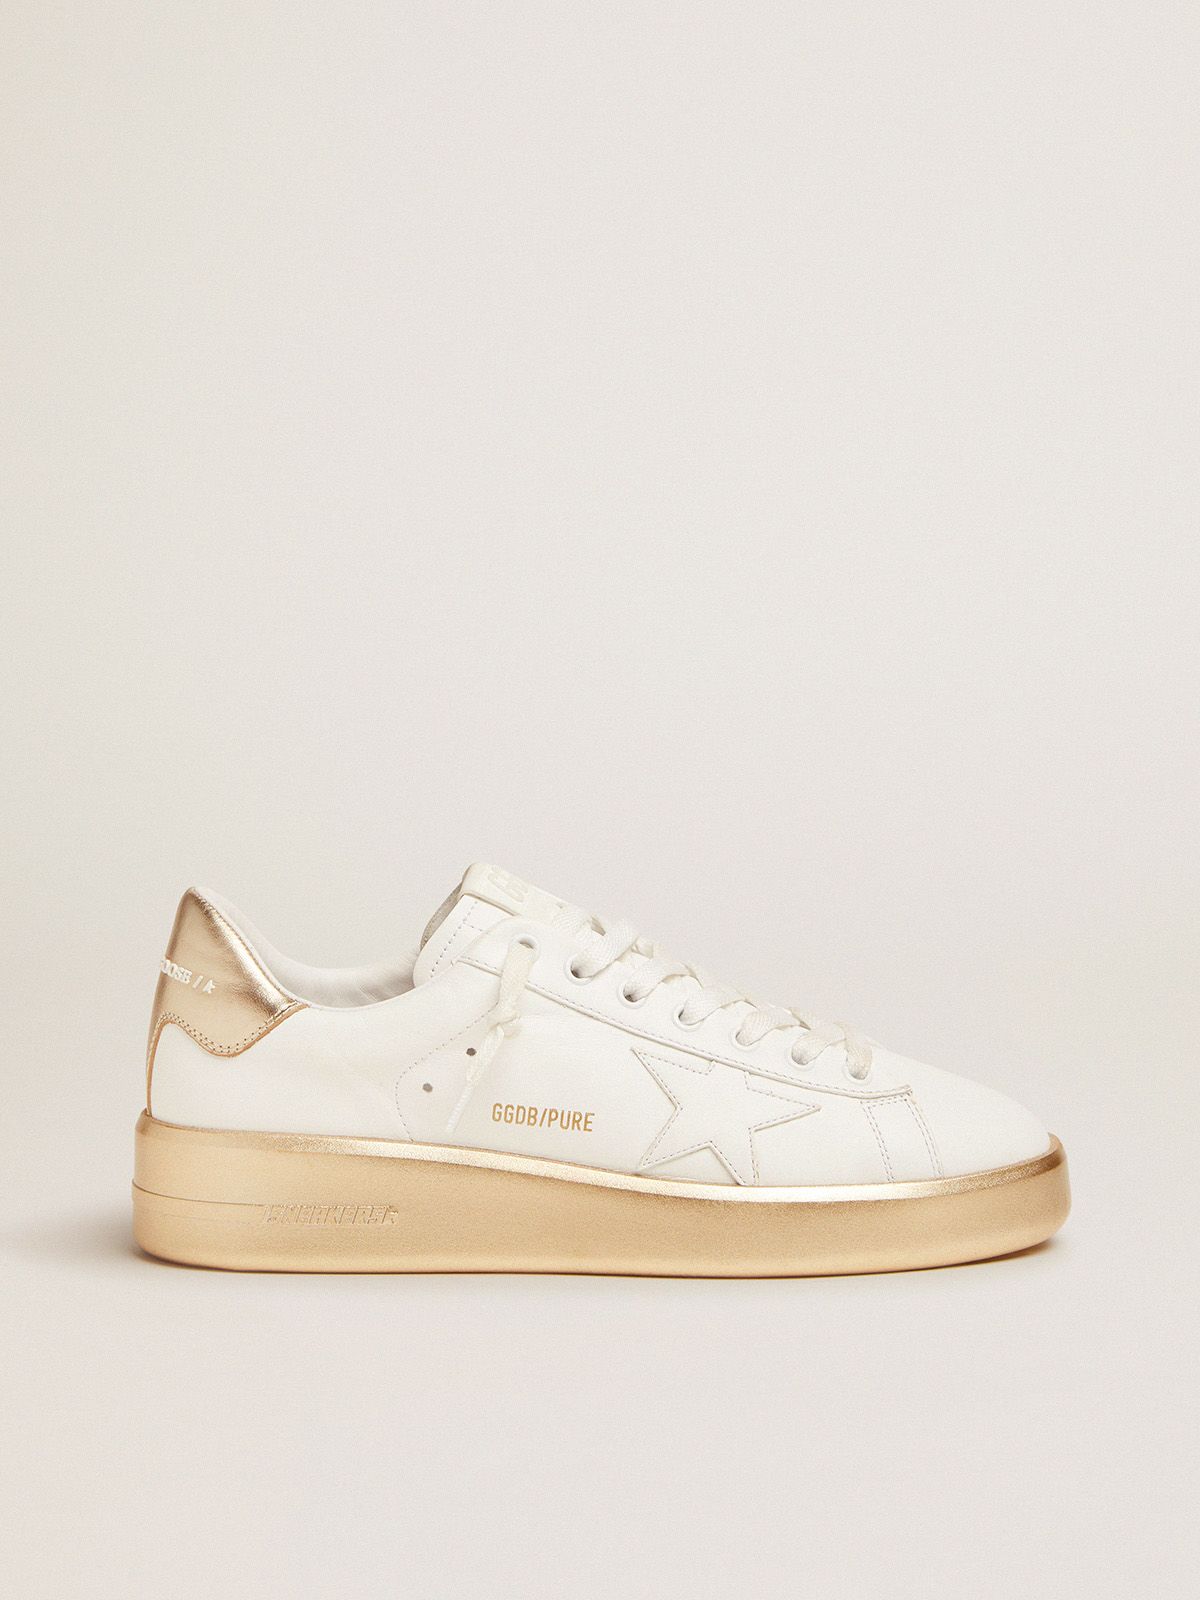 golden goose Purestar foxing laminated in sneakers leather with white gold and heel tab